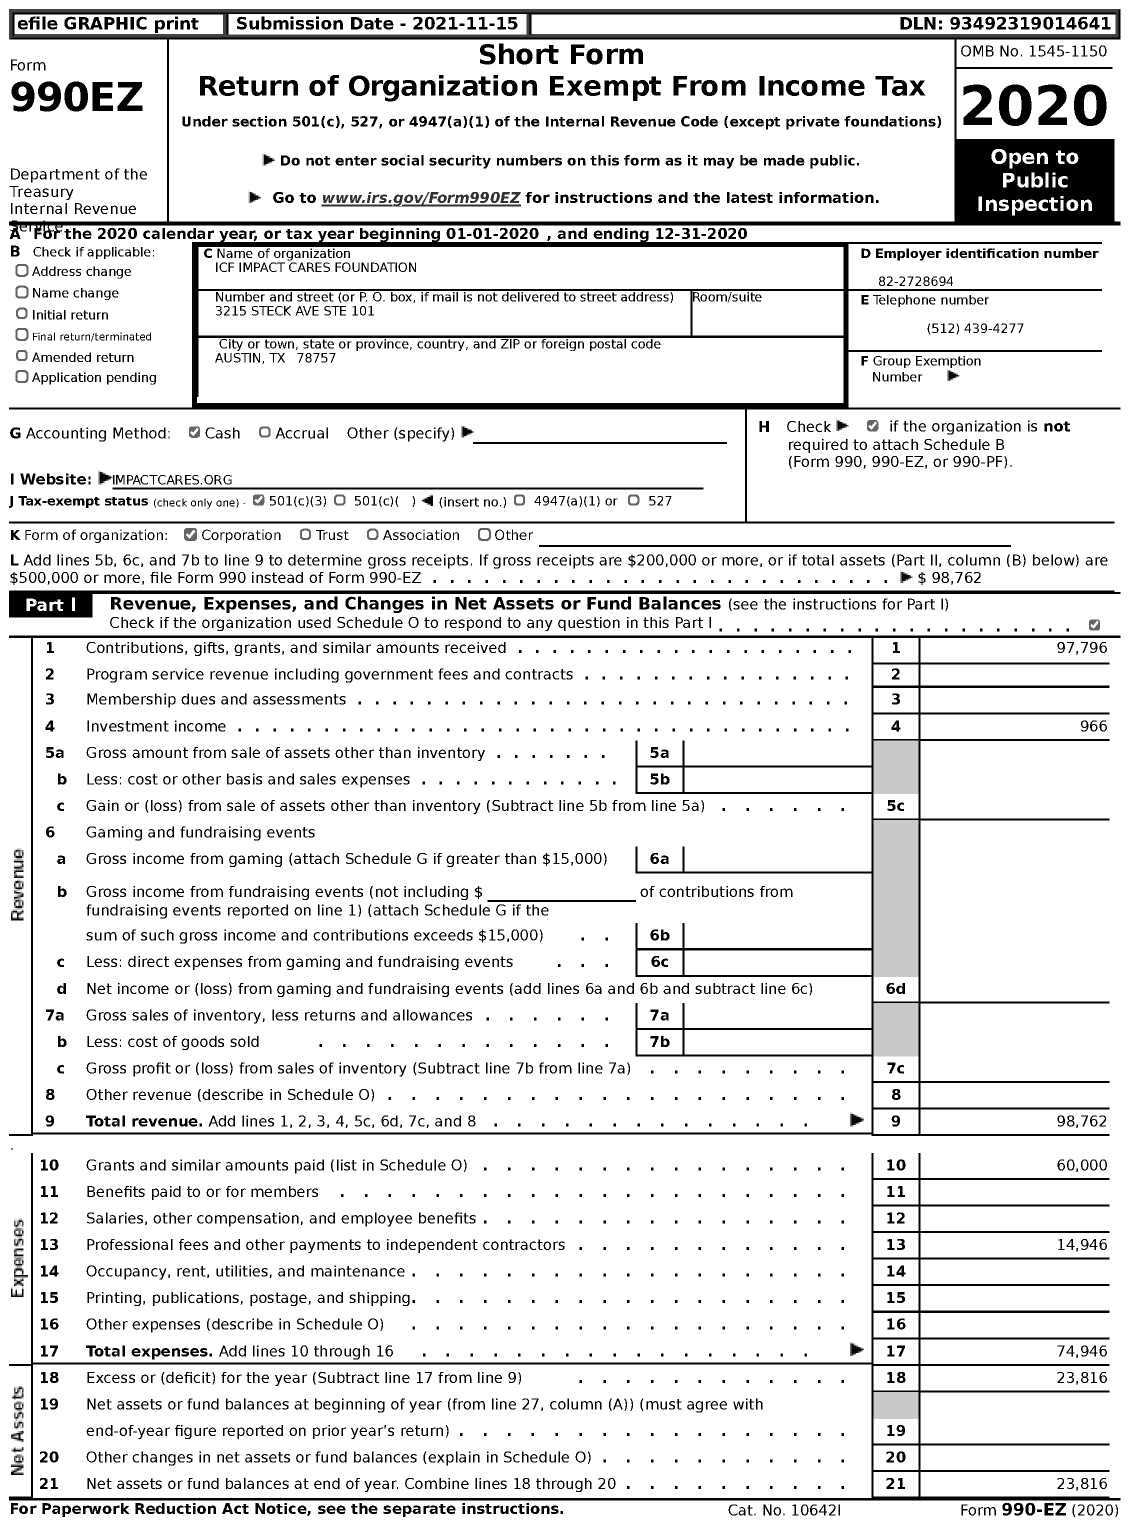 Image of first page of 2020 Form 990EZ for Icf Impact Cares Foundation